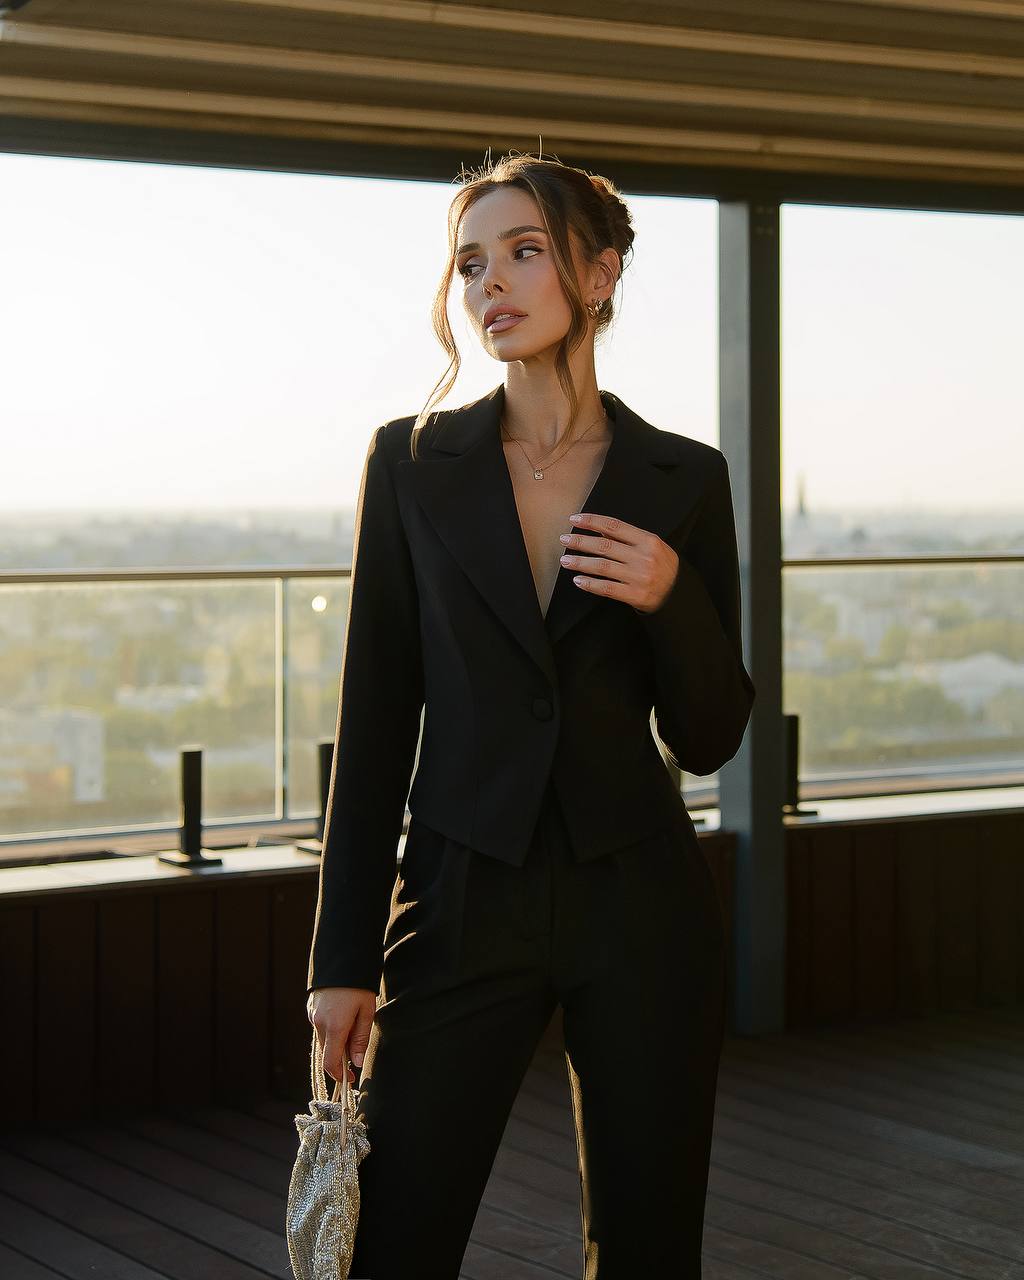 a woman wearing a black suit and holding a purse